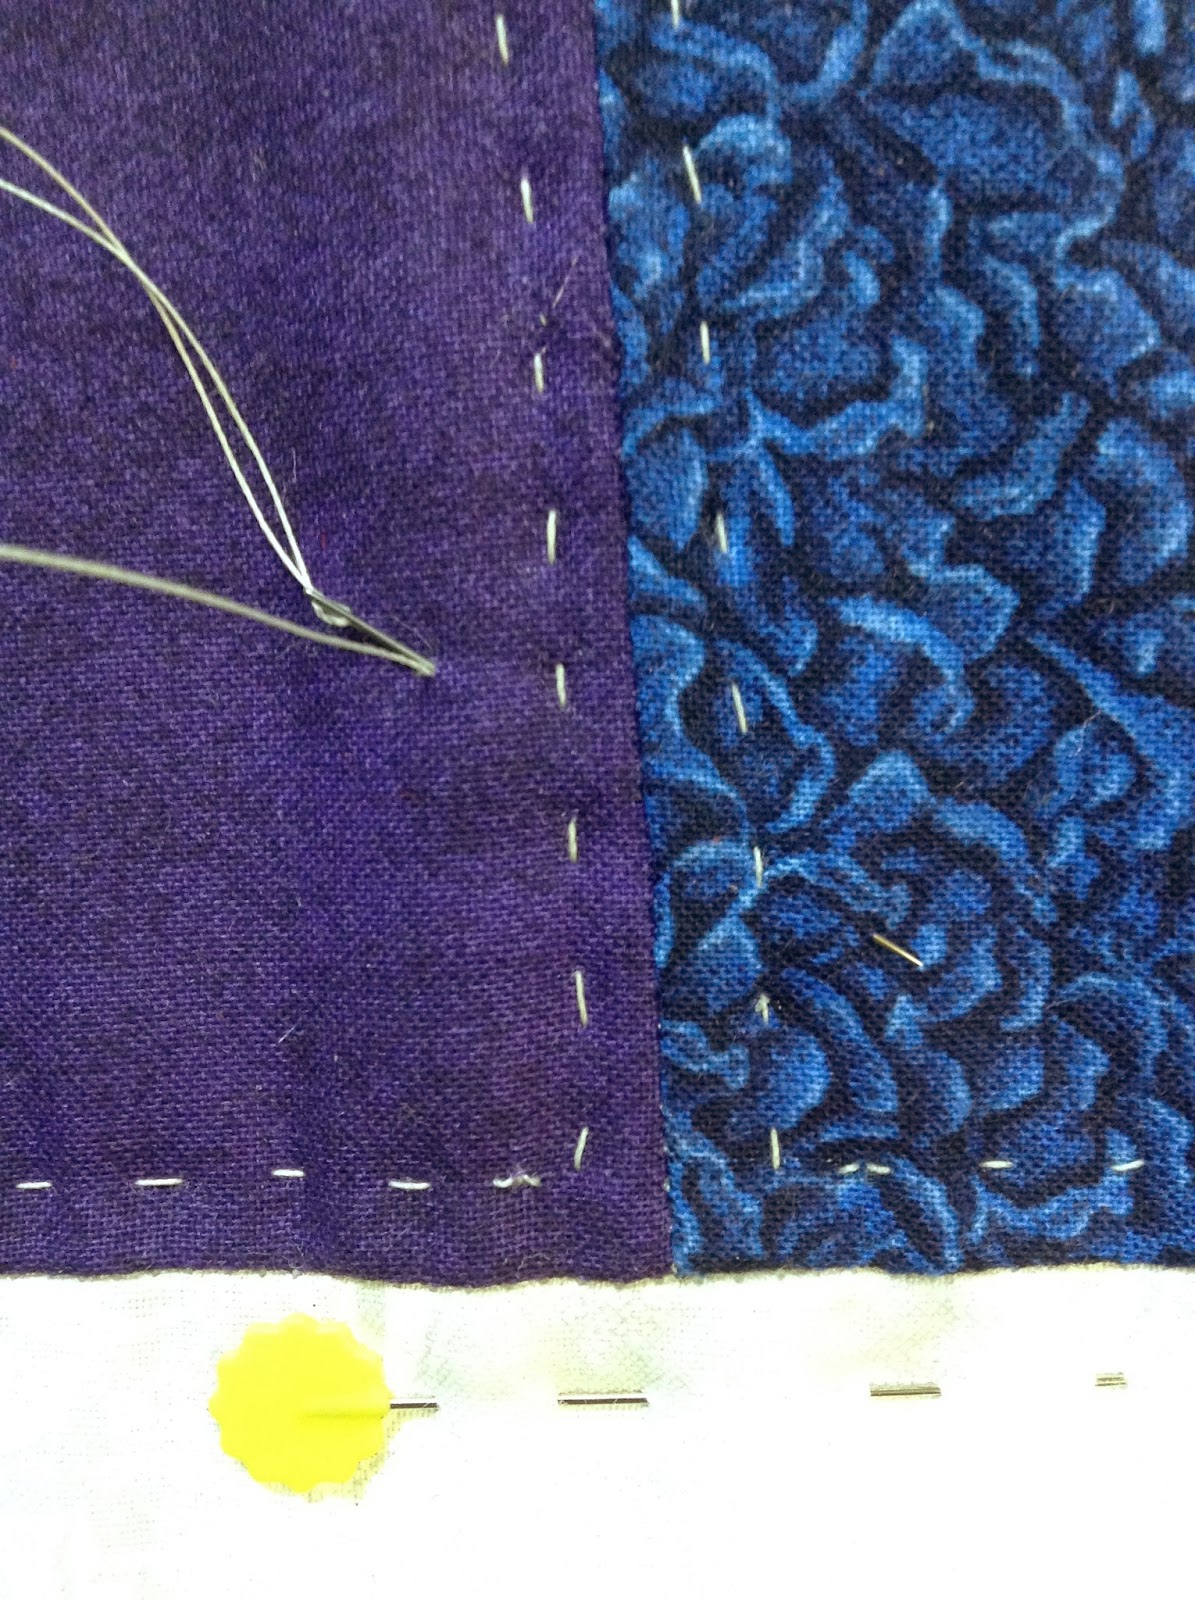 Show Me Sewing: Tutorial on Hand Quilting